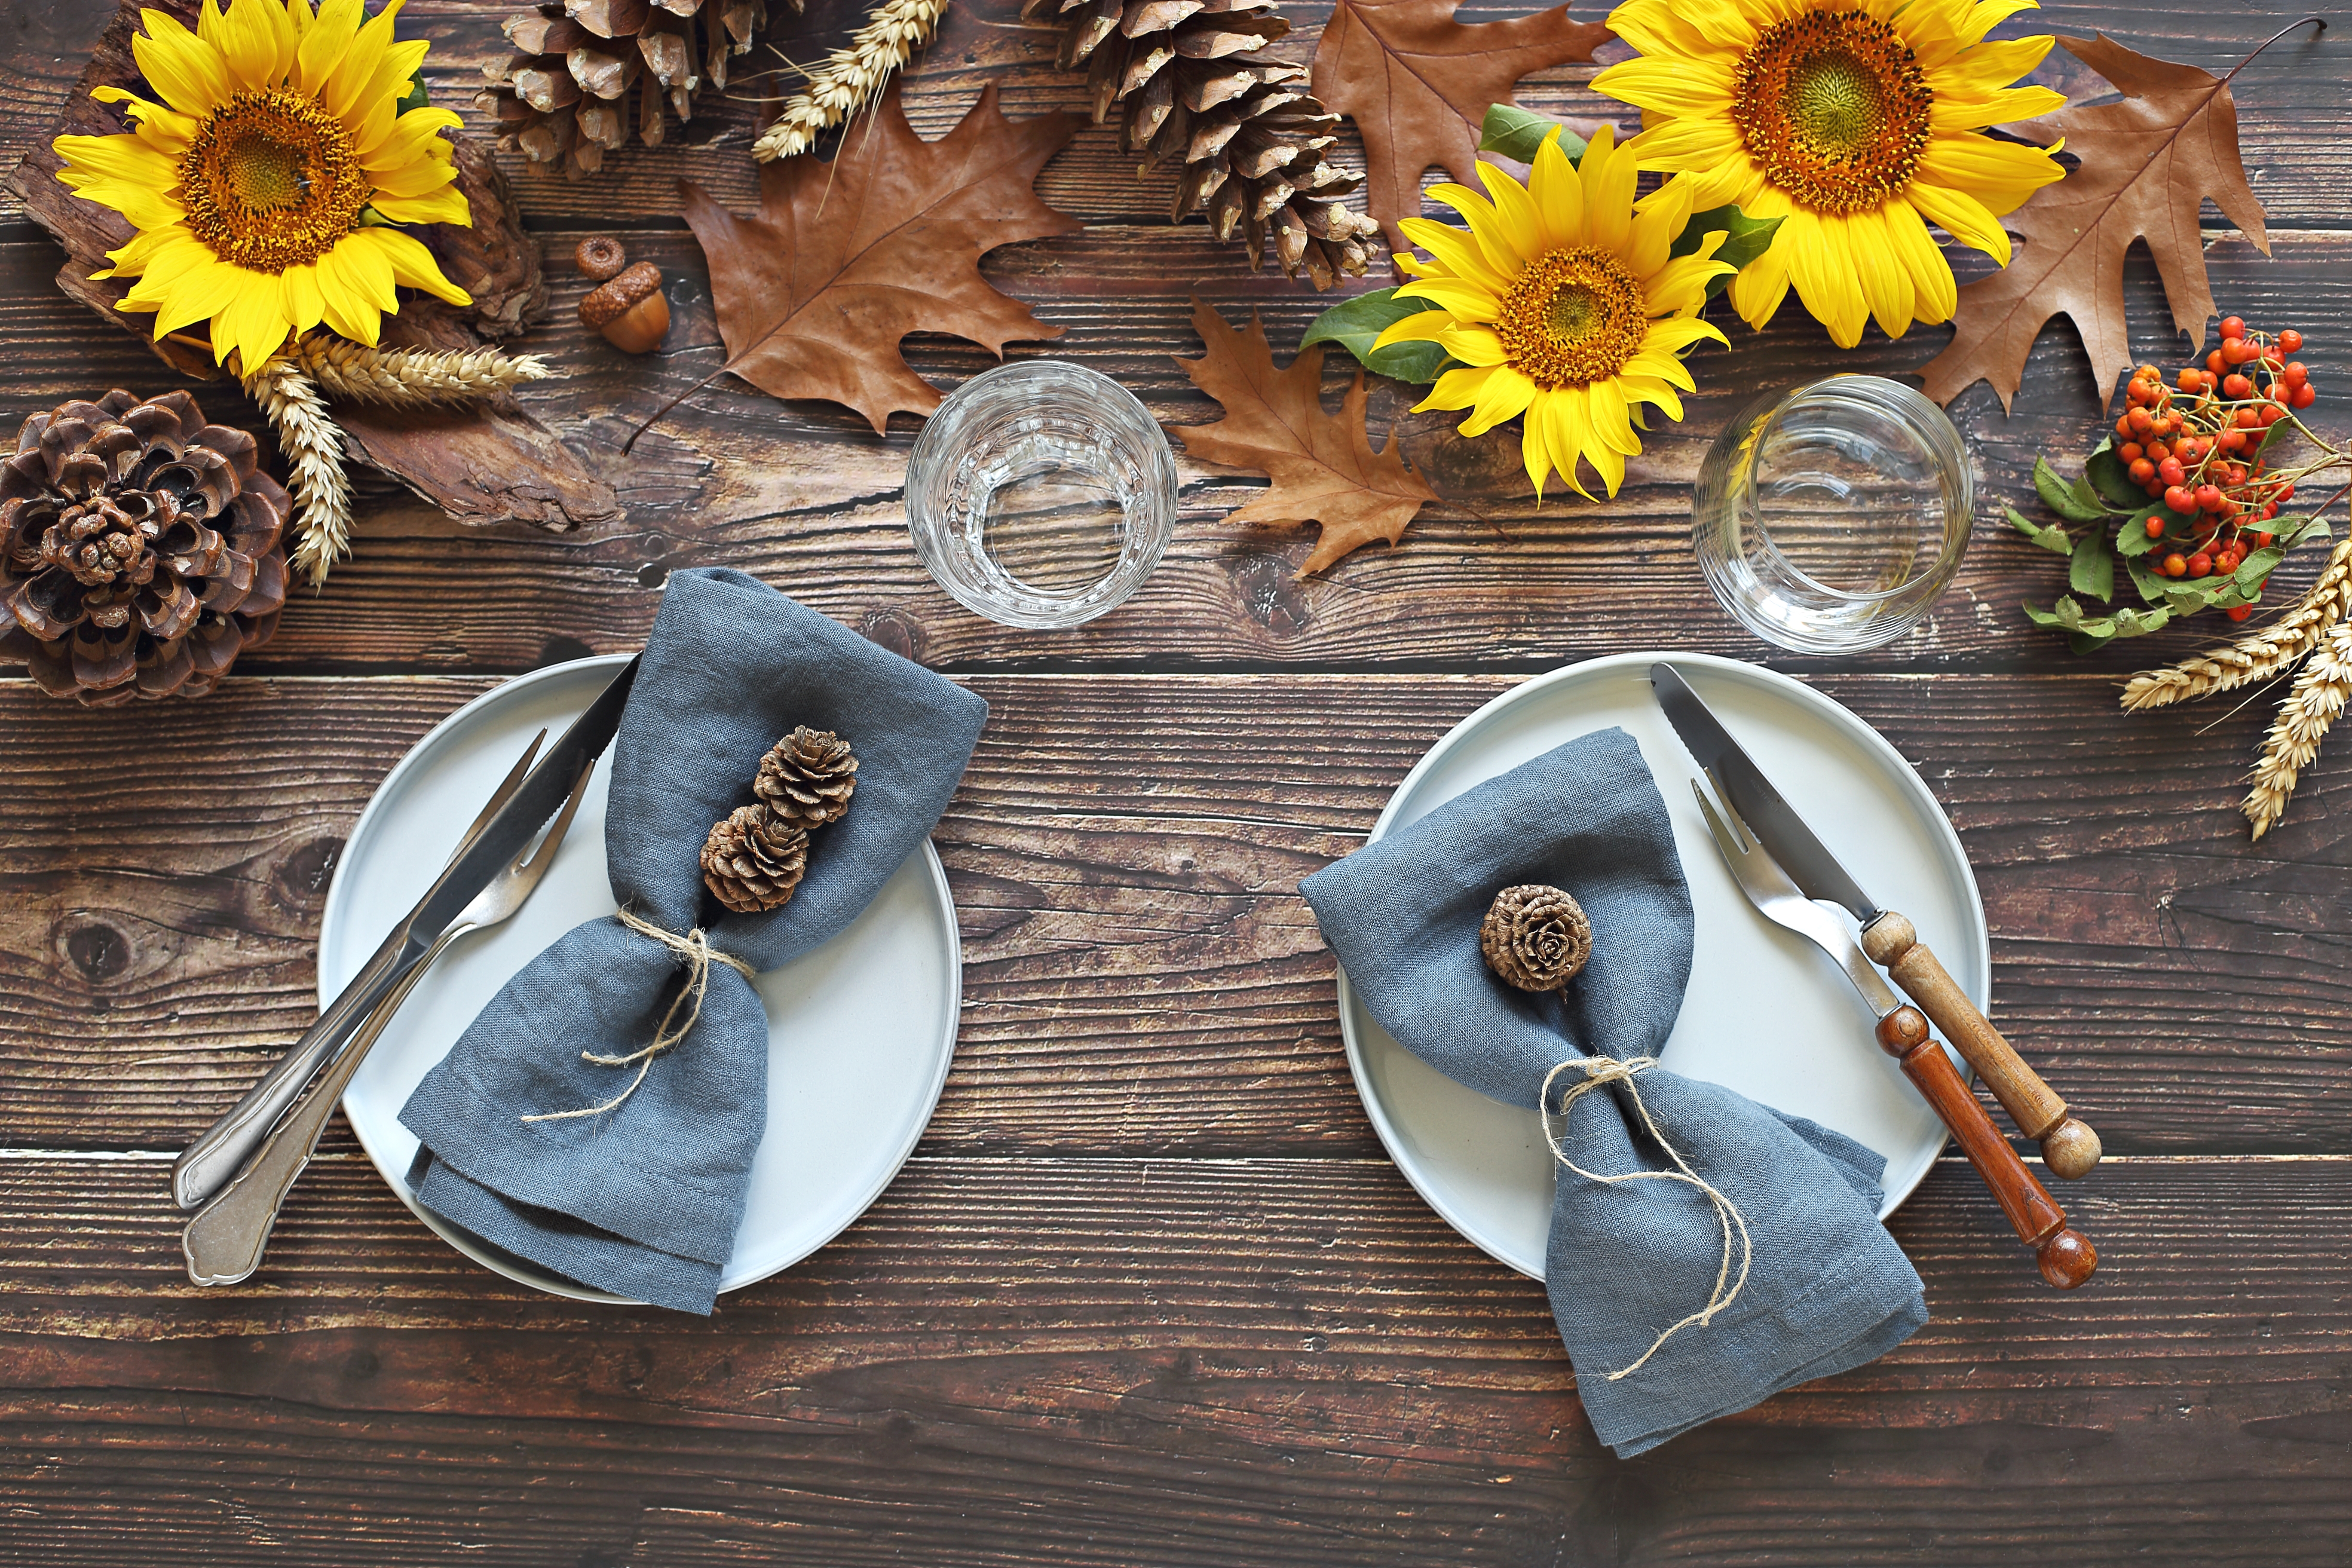 Autumnal Table Setting